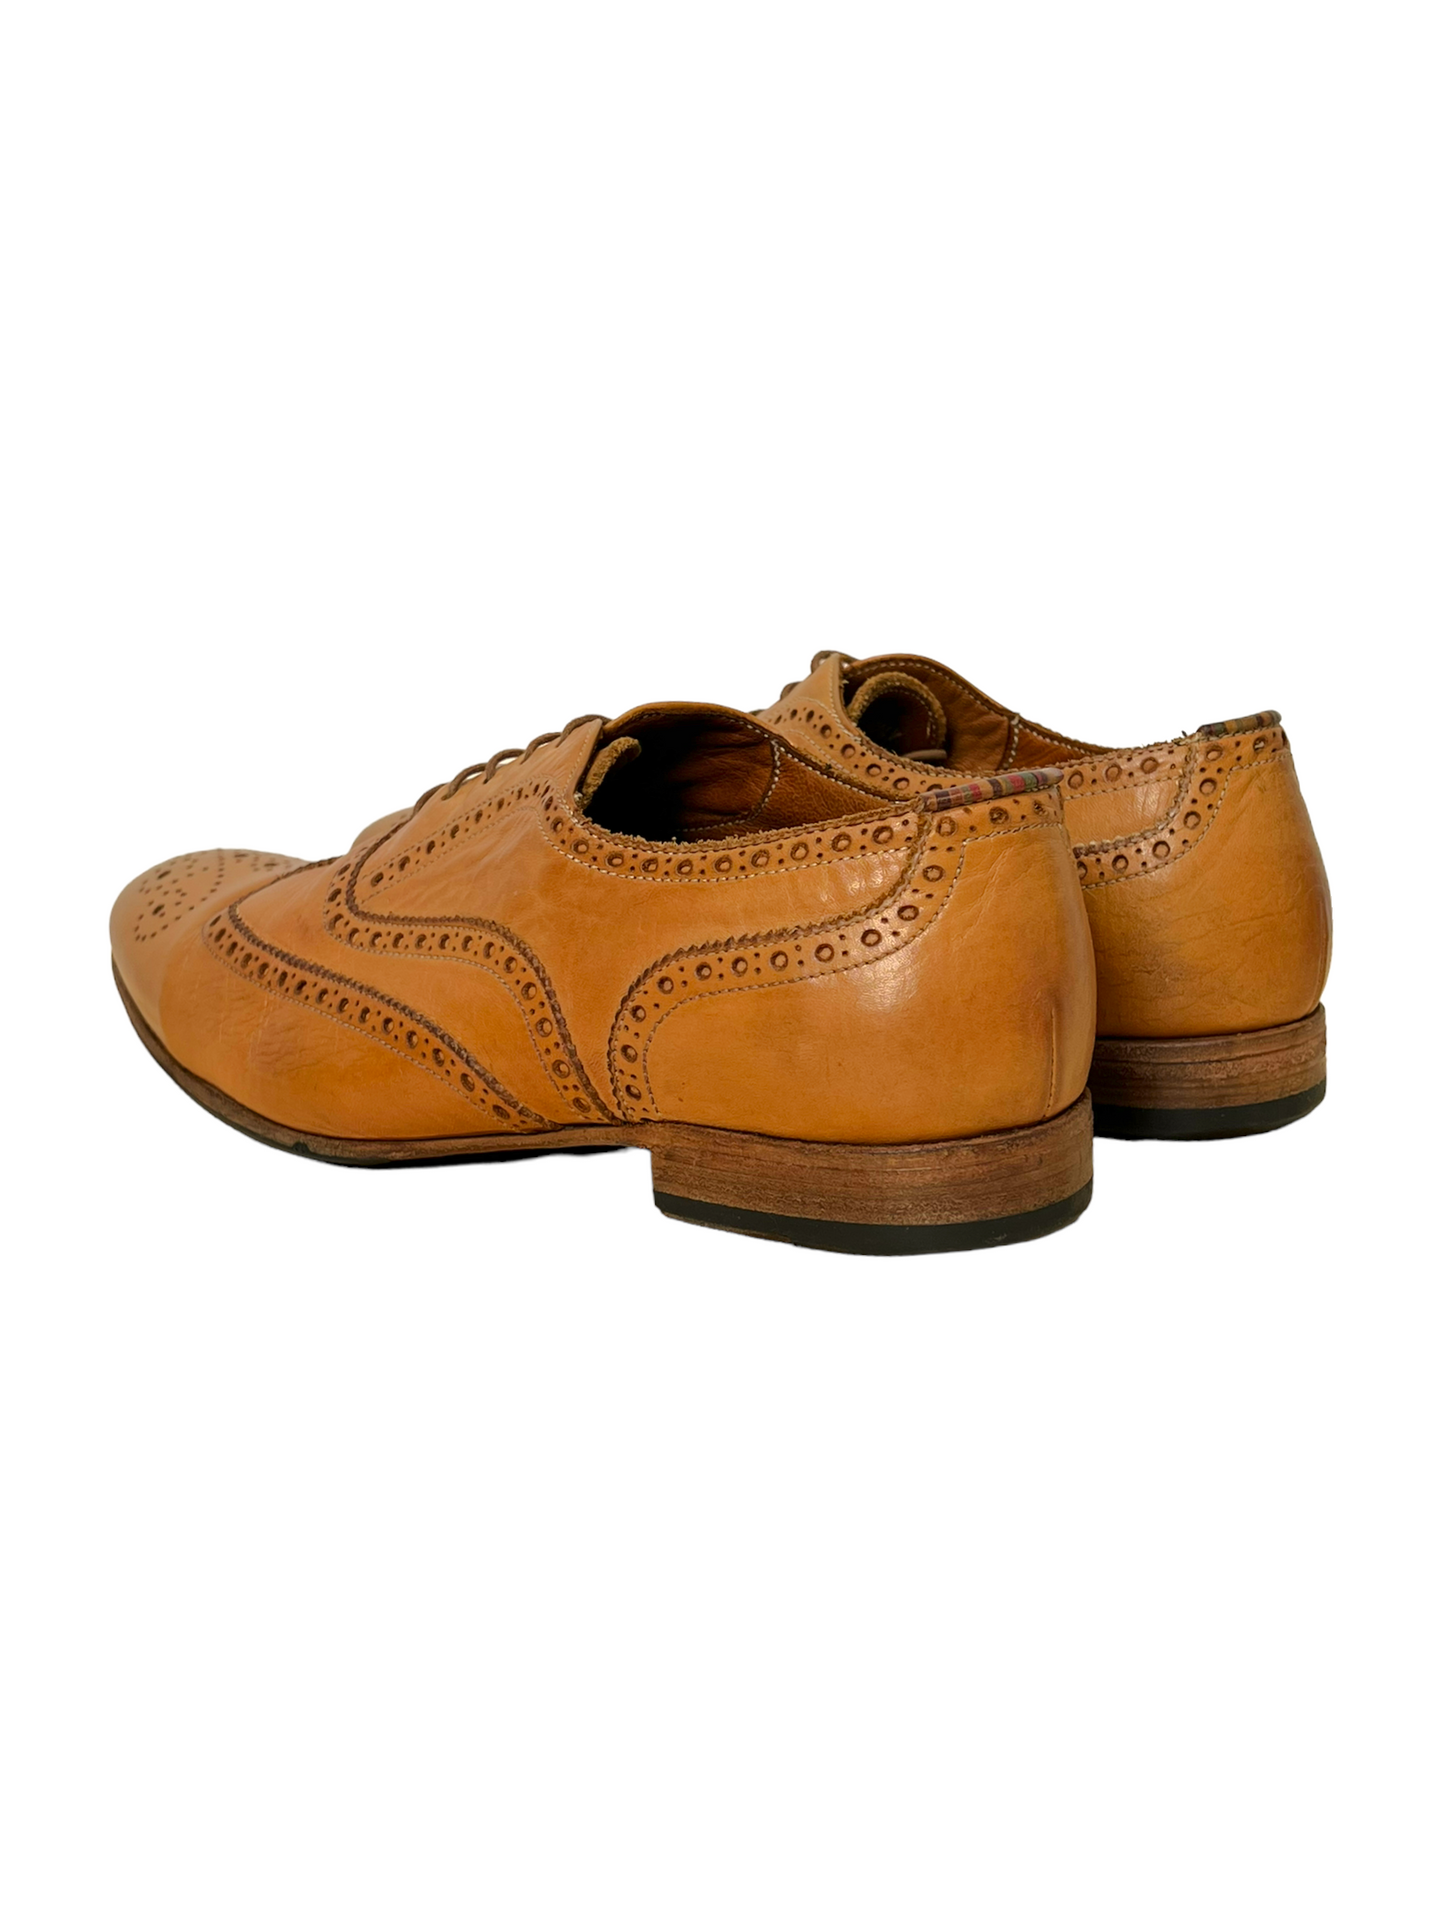 Paul Smith Light Brown Toe Stamped Leather Wingtip Oxford Dress Shoes - Genuine Design Luxury Consignment for Men. New & Pre-Owned Clothing, Shoes, & Accessories. Calgary, Canada